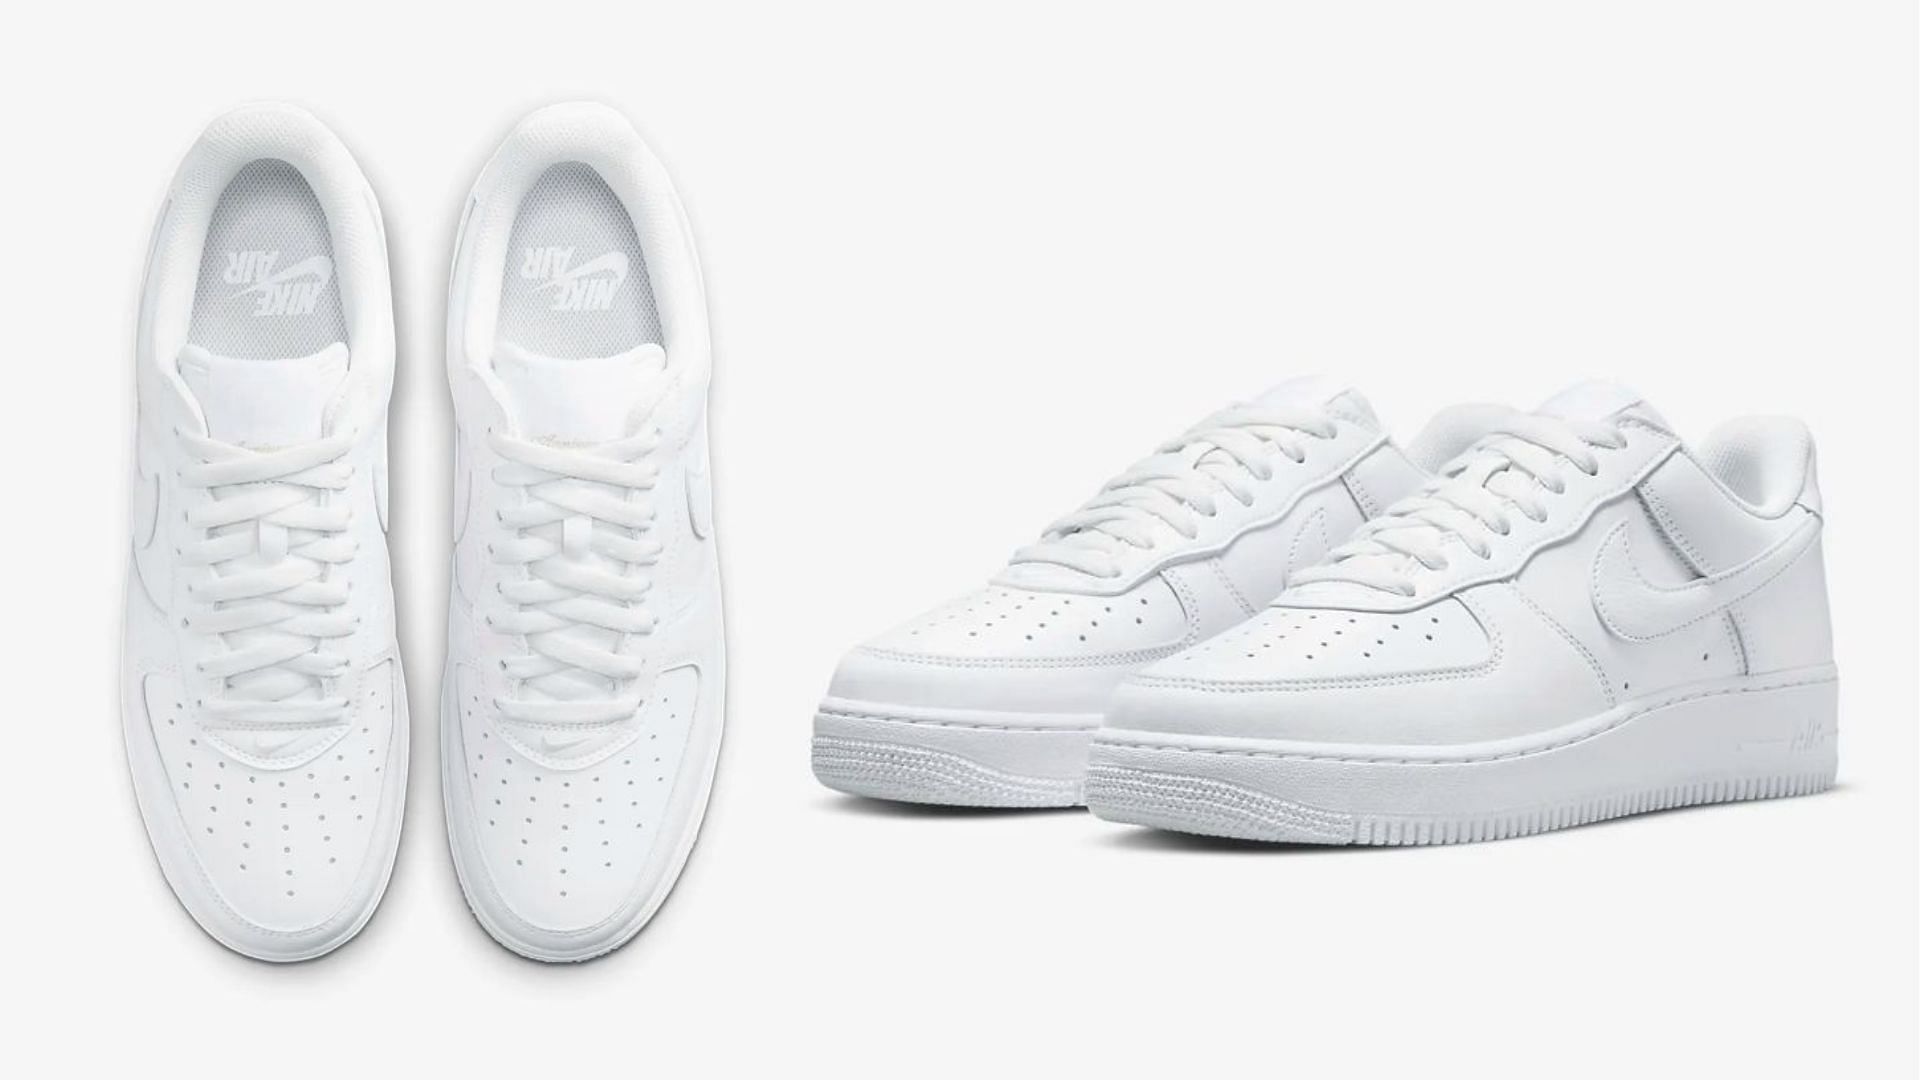 Which All White Sneaker Matches Your Personal Style, Adidas Stan Smith,  Nike Airforce One, Adidas Superstar, Vans Ca…